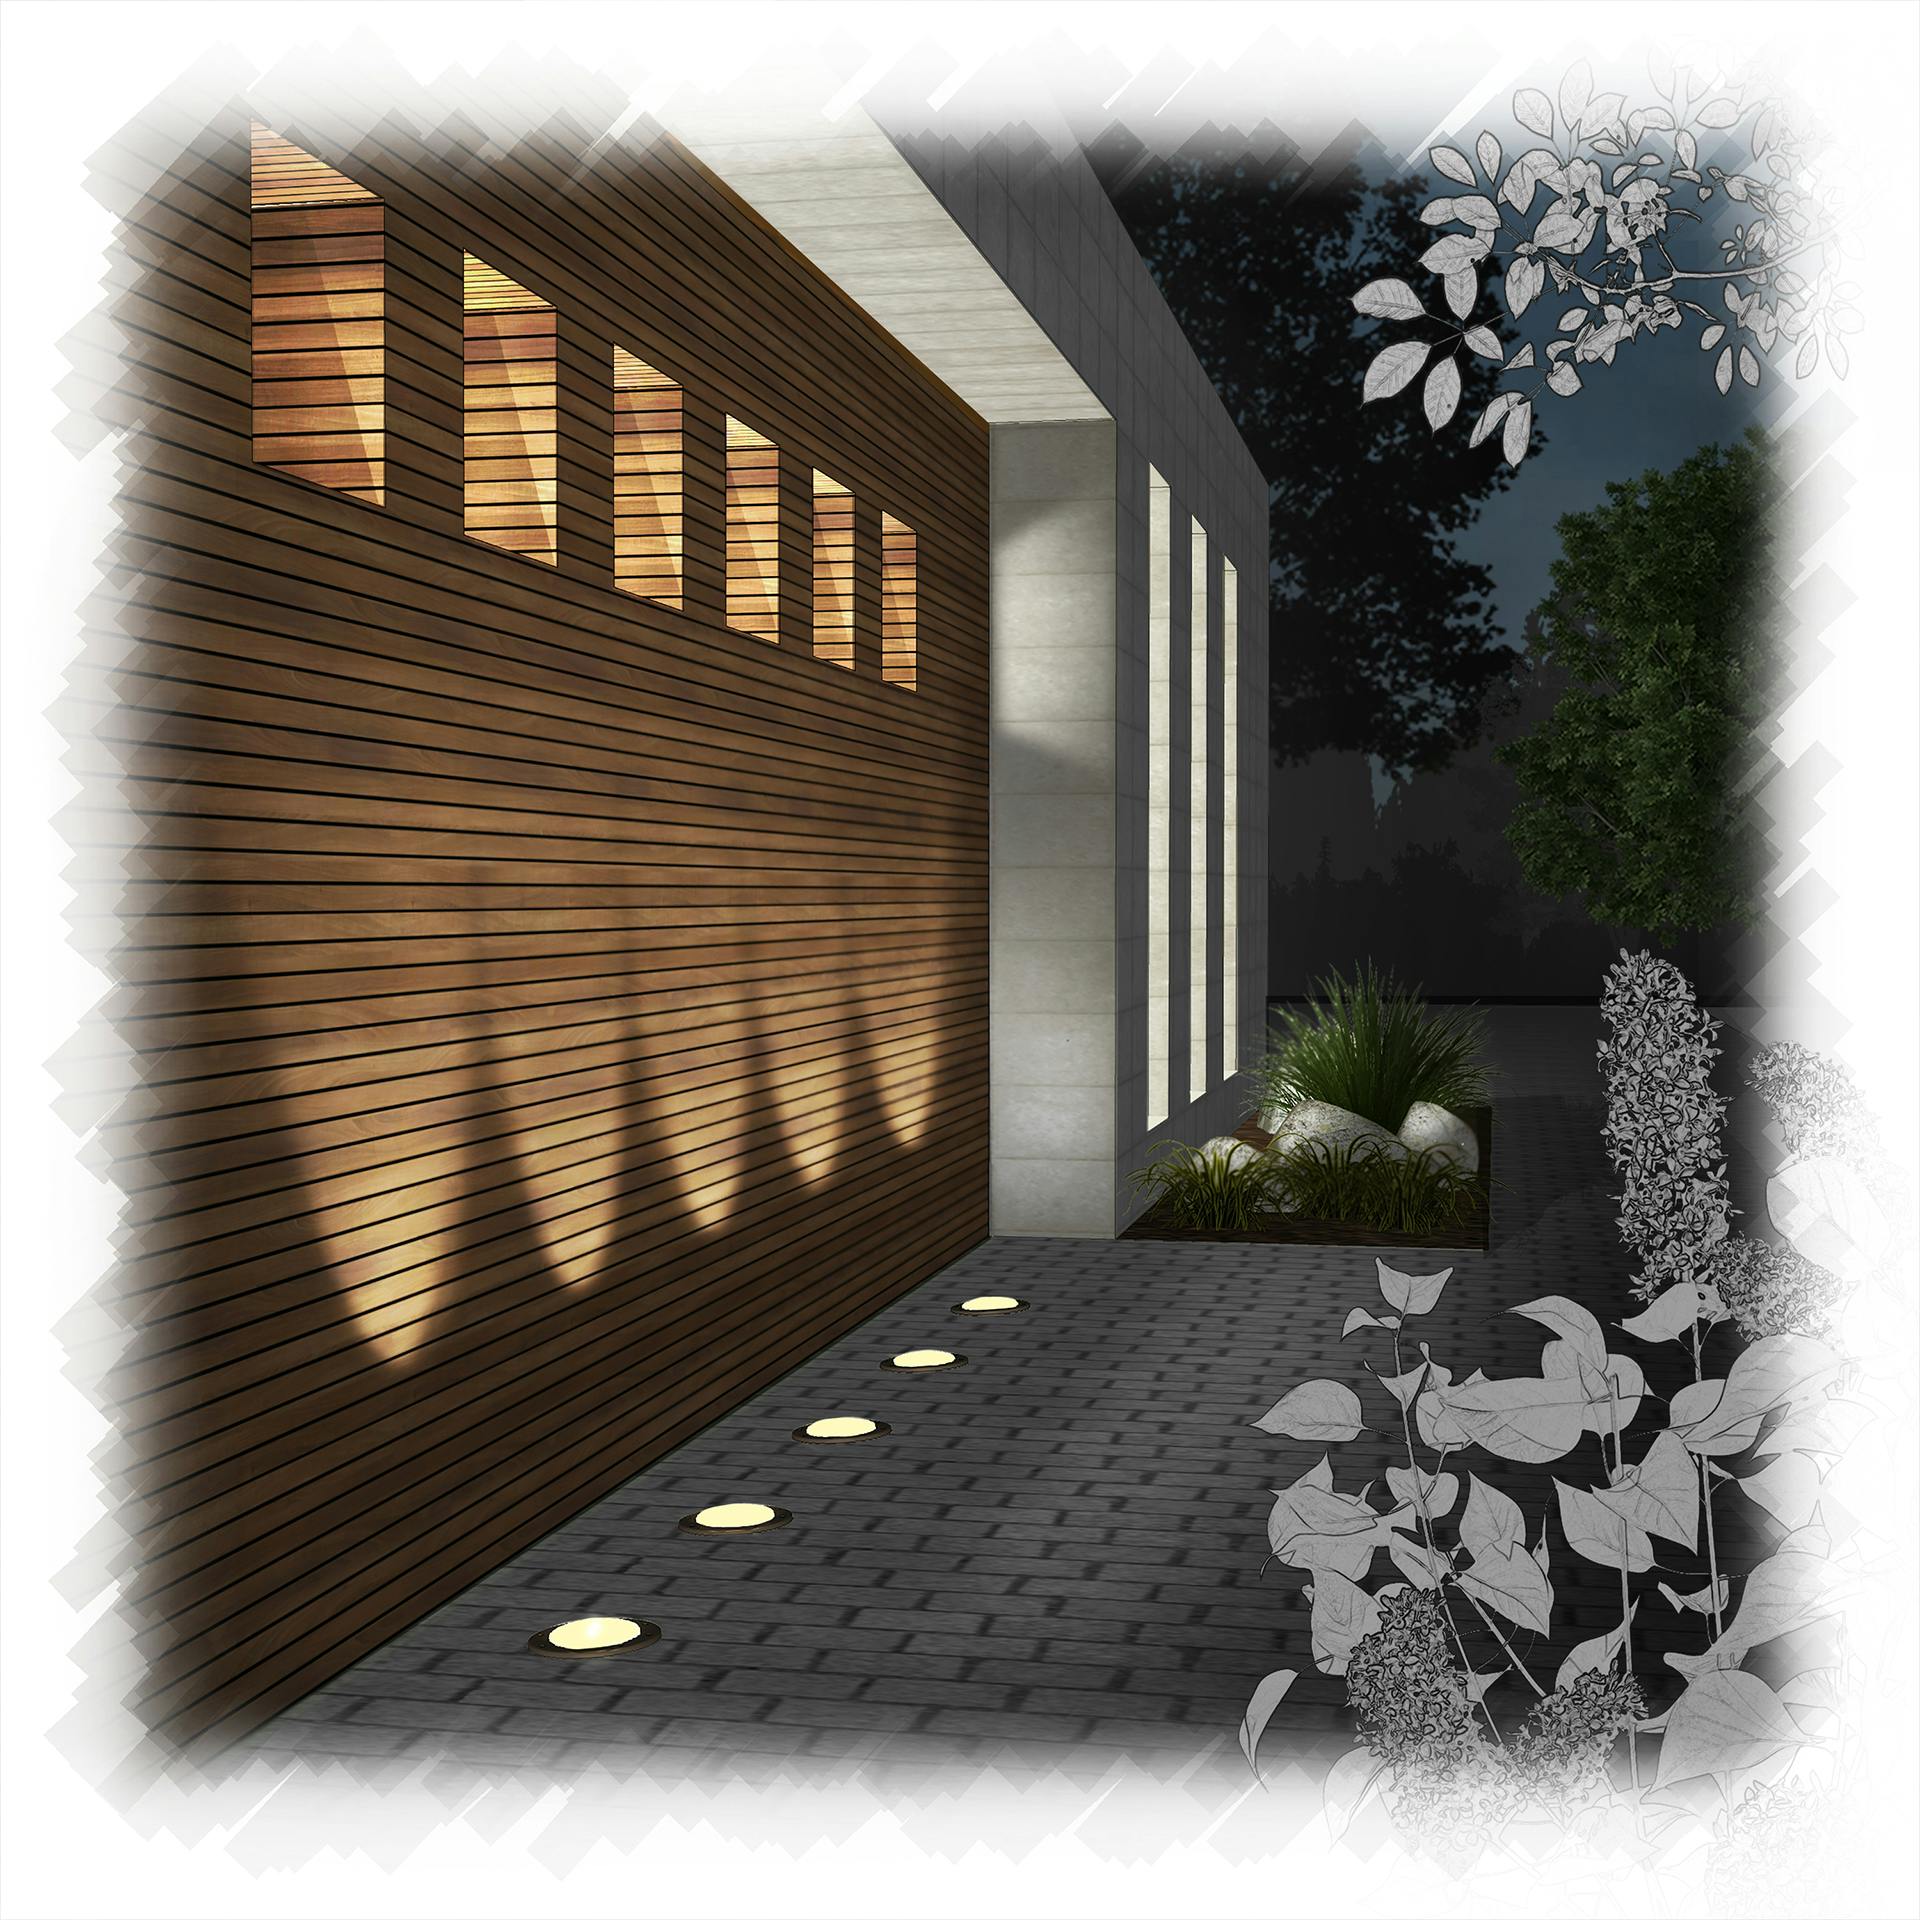 Illustration of an exterior home with in ground lights shining on a wall